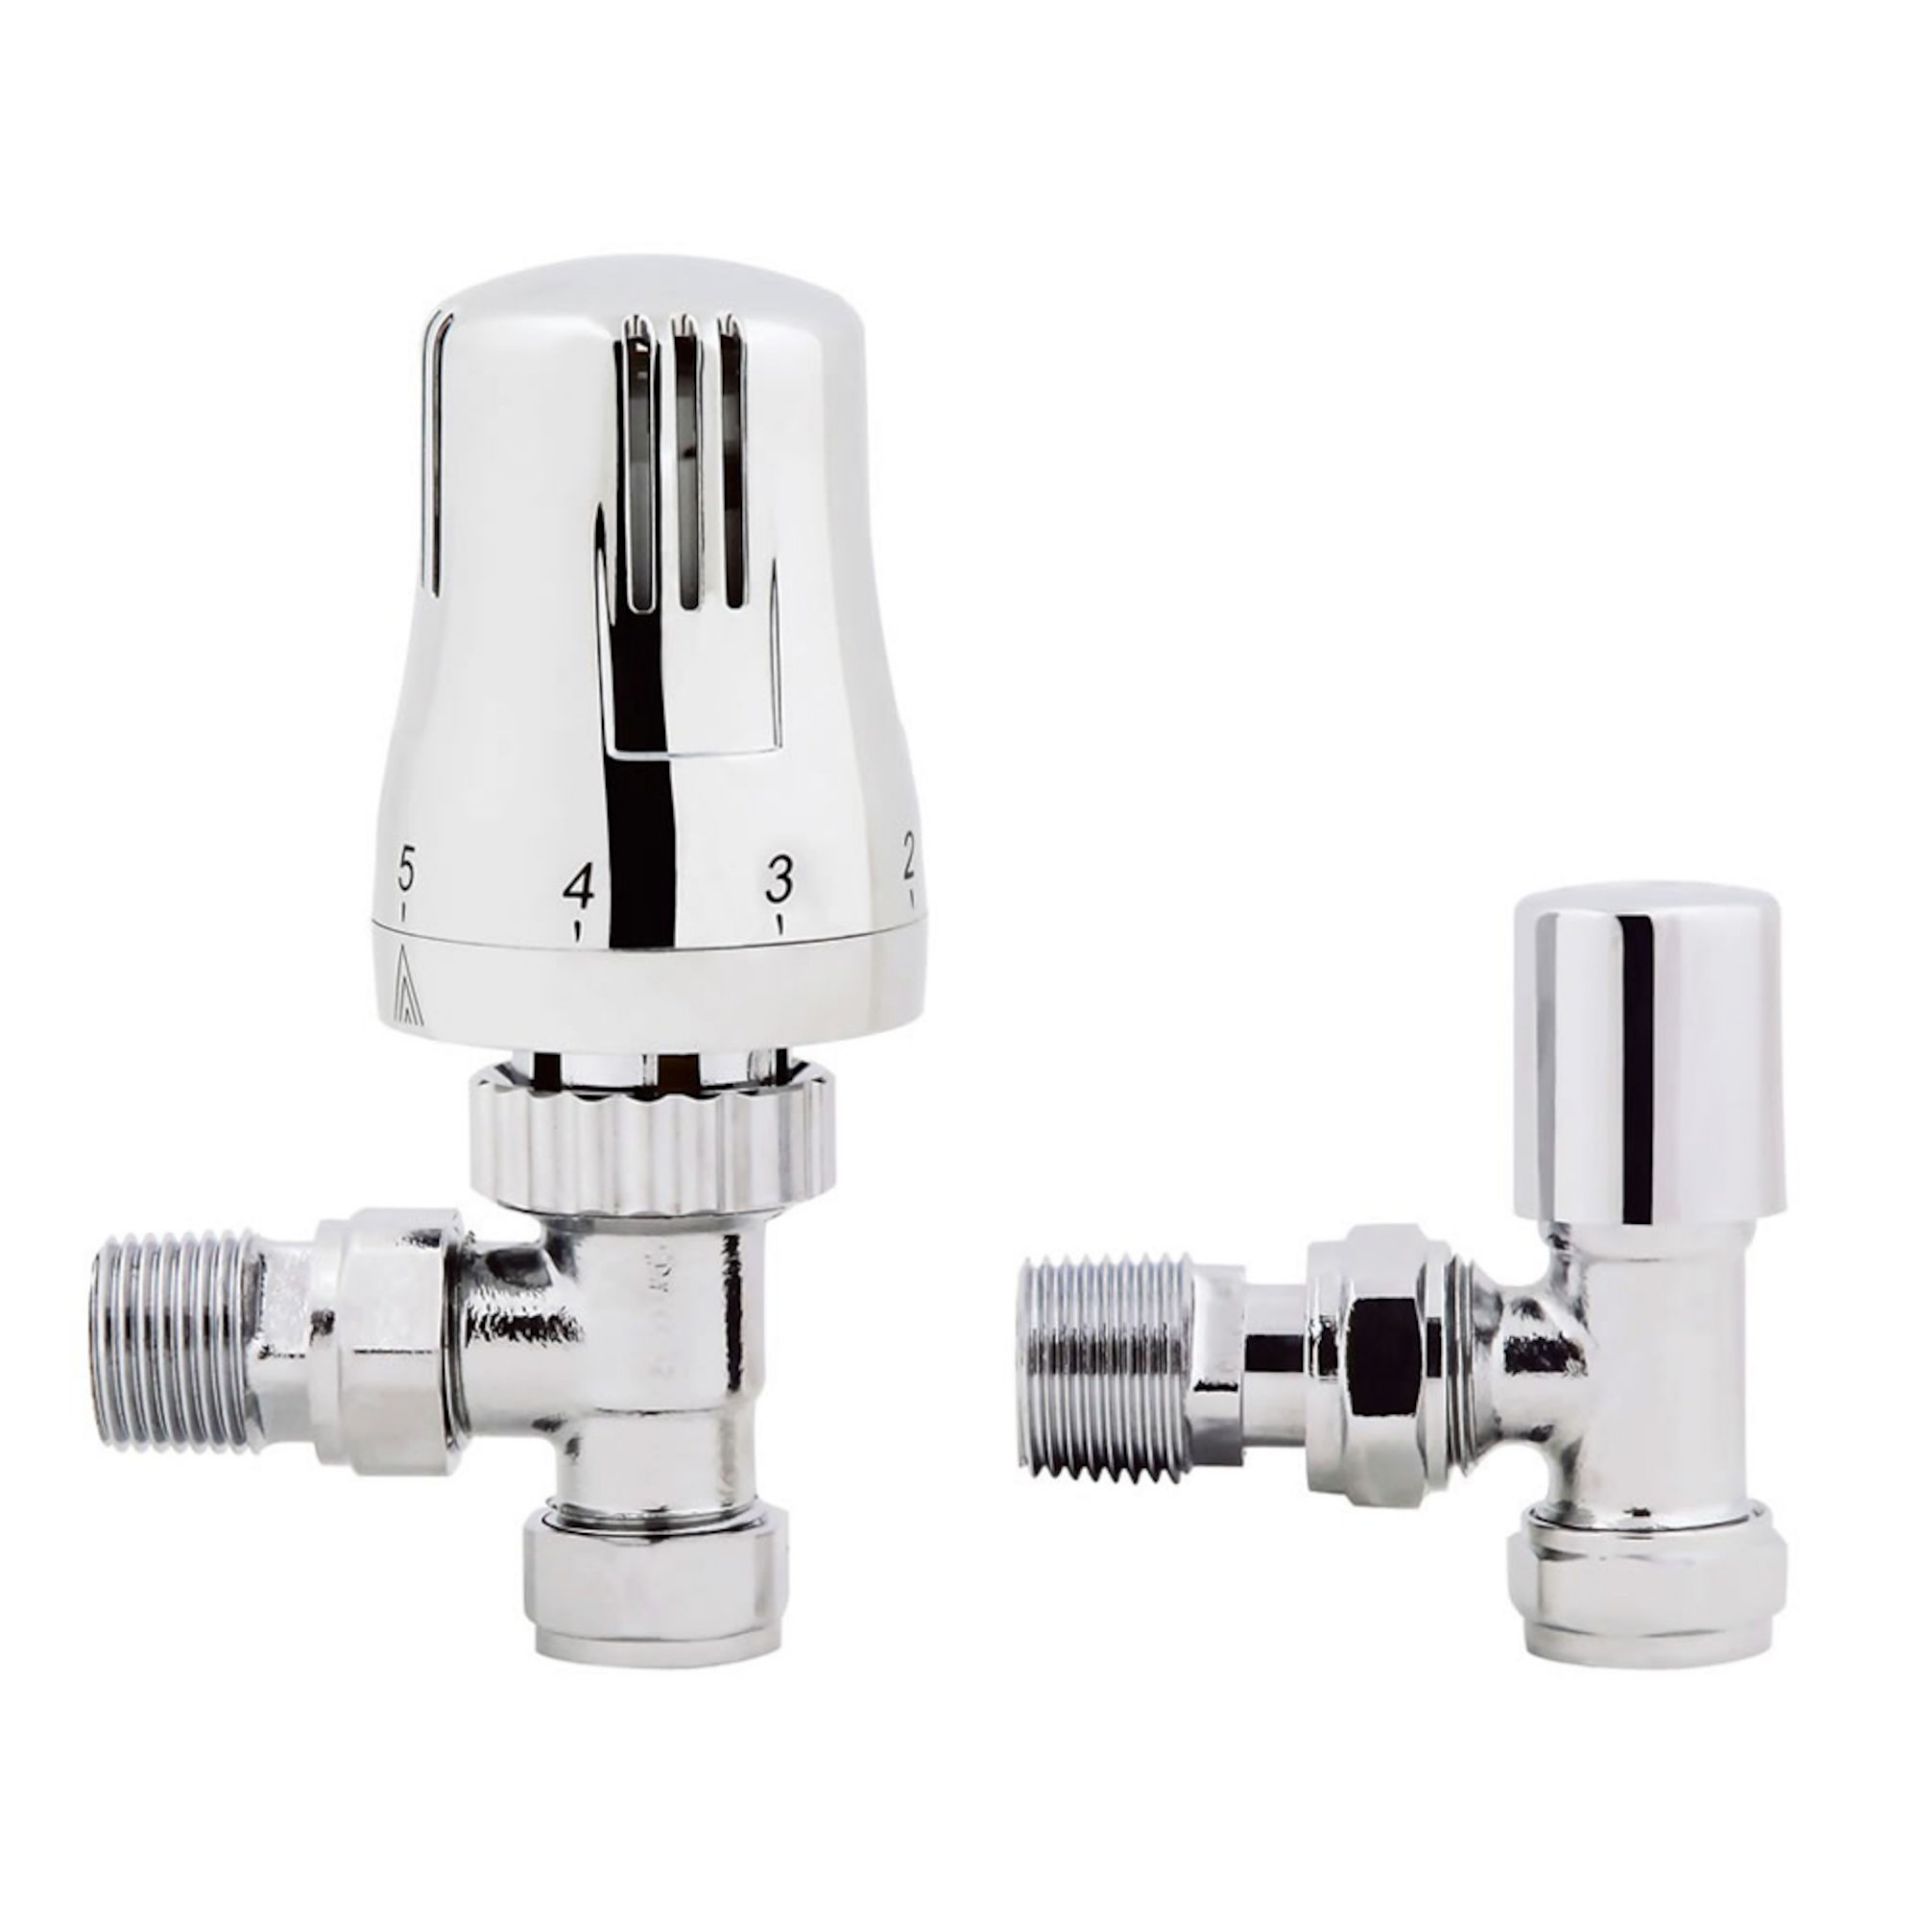 (PM1008) 15mm Standard Connection Thermostatic Angled Chrome Radiator Valves Chrome Plated Sol... - Image 2 of 3